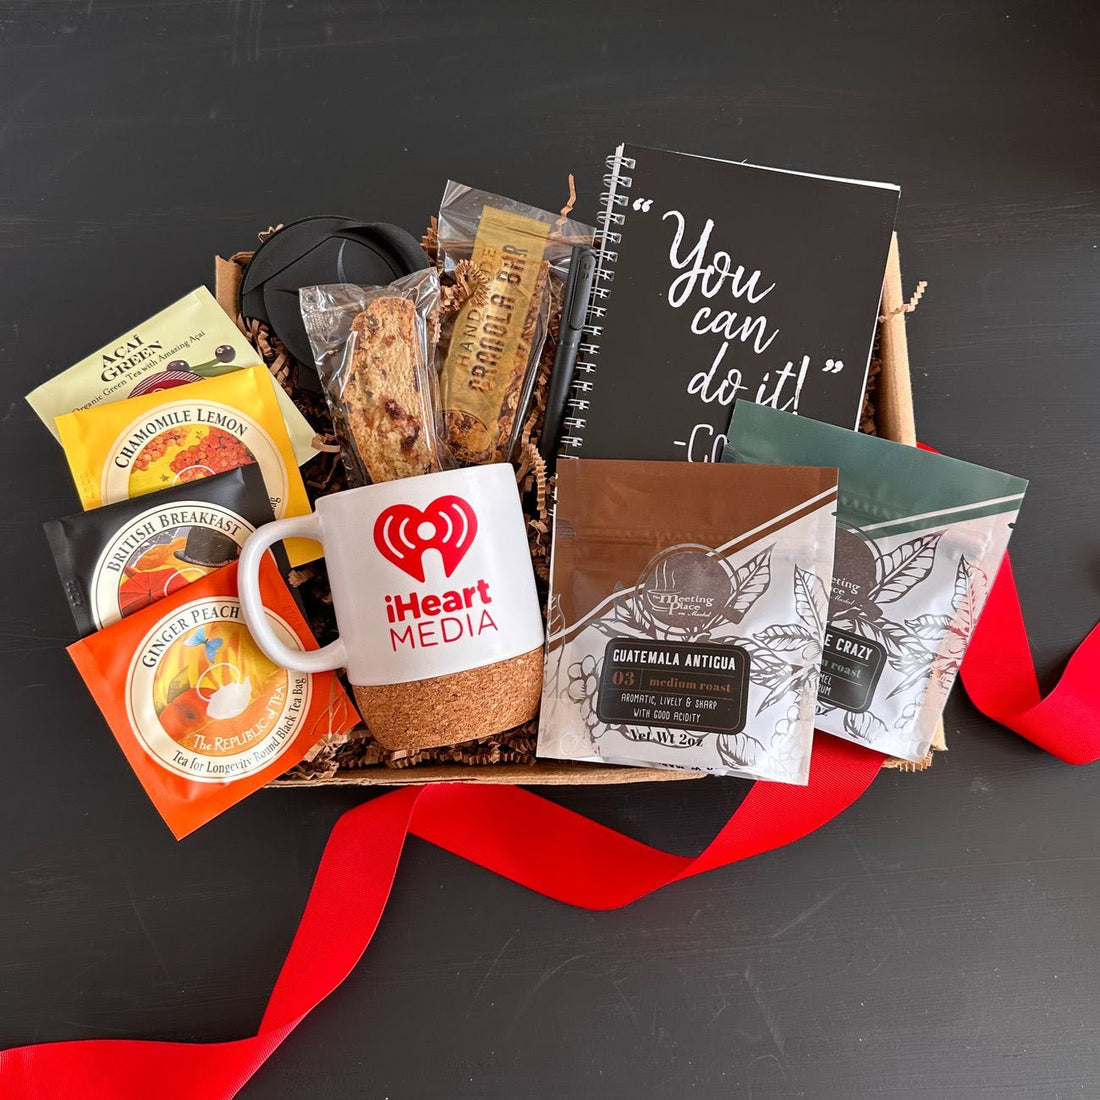 Creating Personalized Company Gifts for the Holidays - The Meeting Place on Market